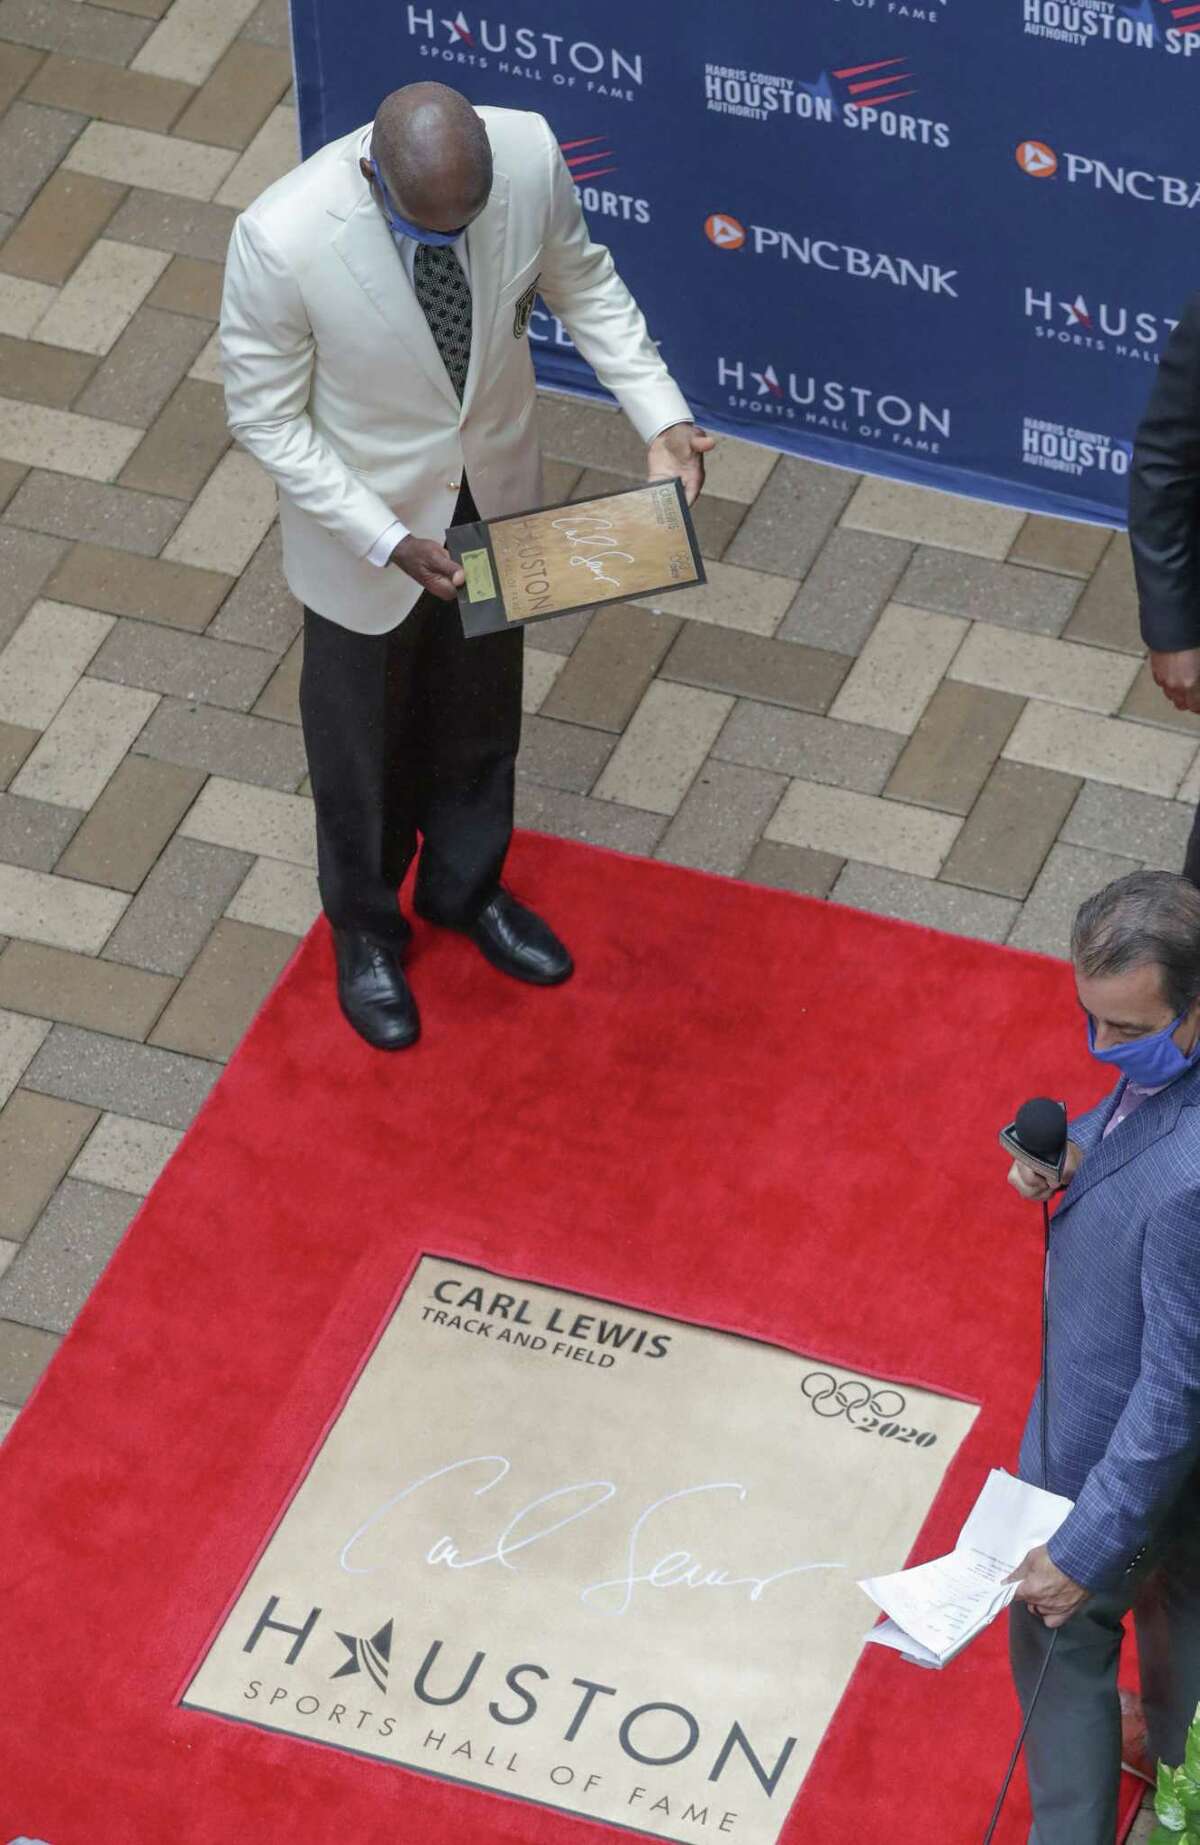 Carl Lewis looks at his walk of fame plaque during the Houston Sports Hall of Fame Ring Presentation and Walk of Fame Unveiling Thursday, Jan. 21, 2021, in Houston. Lewis, Mary Lou Retton, Rudy Tomjanovich and the late Bob Lanier were honored at the event.